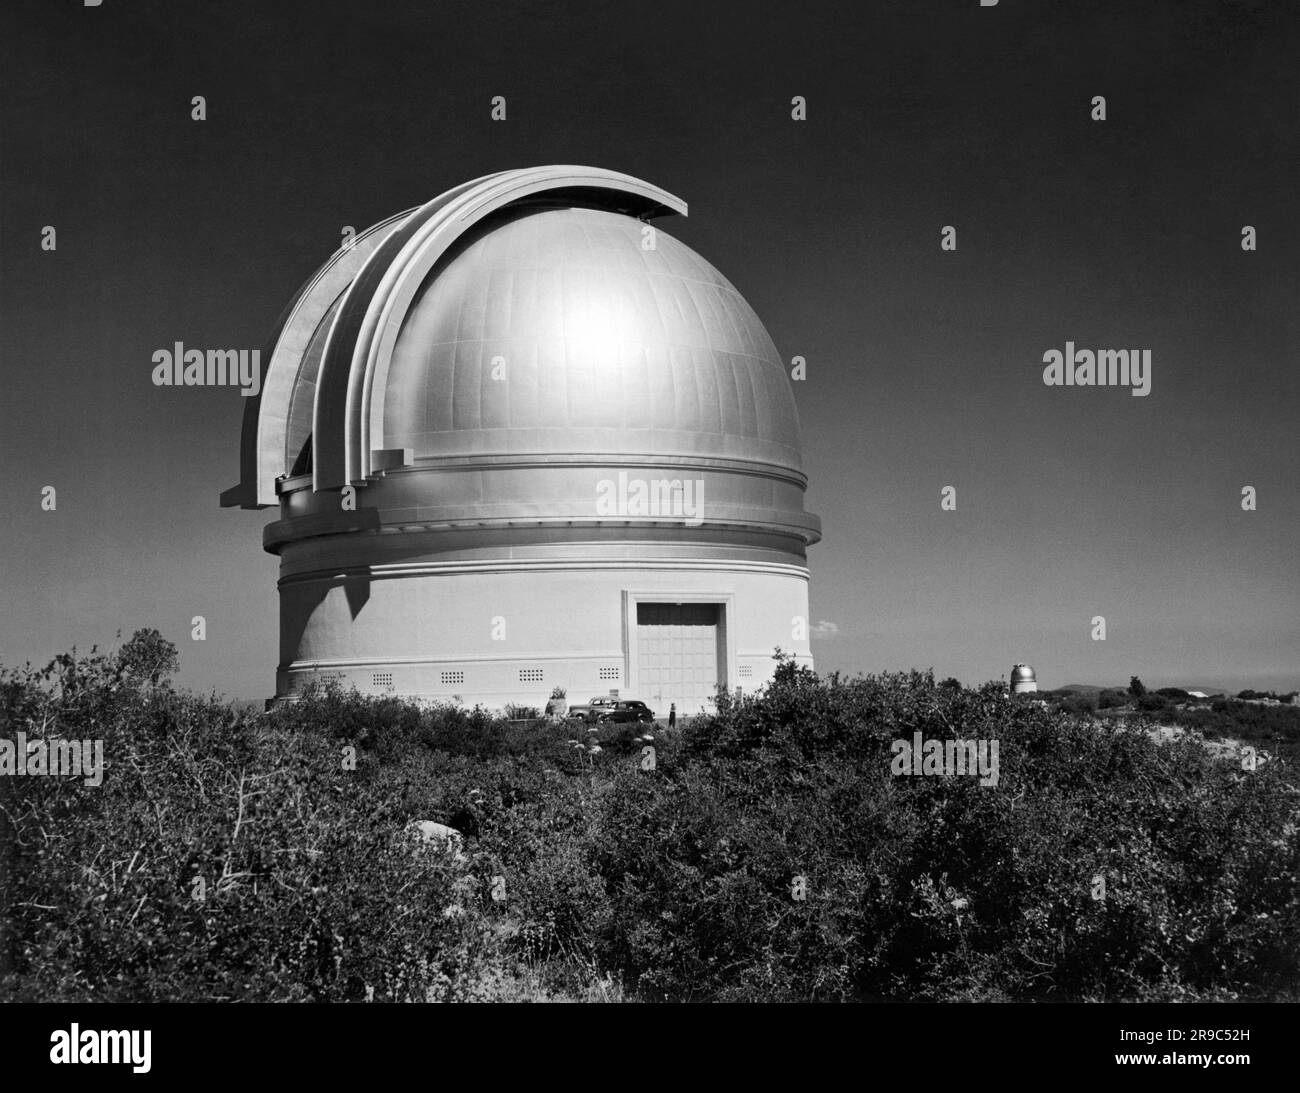 Palomar Mountain, California:  1941 Cal Tech's Mount Palomar Observatory in San Diego County. The smaller observatory at the right houses the 18' refracting telescope. Stock Photo